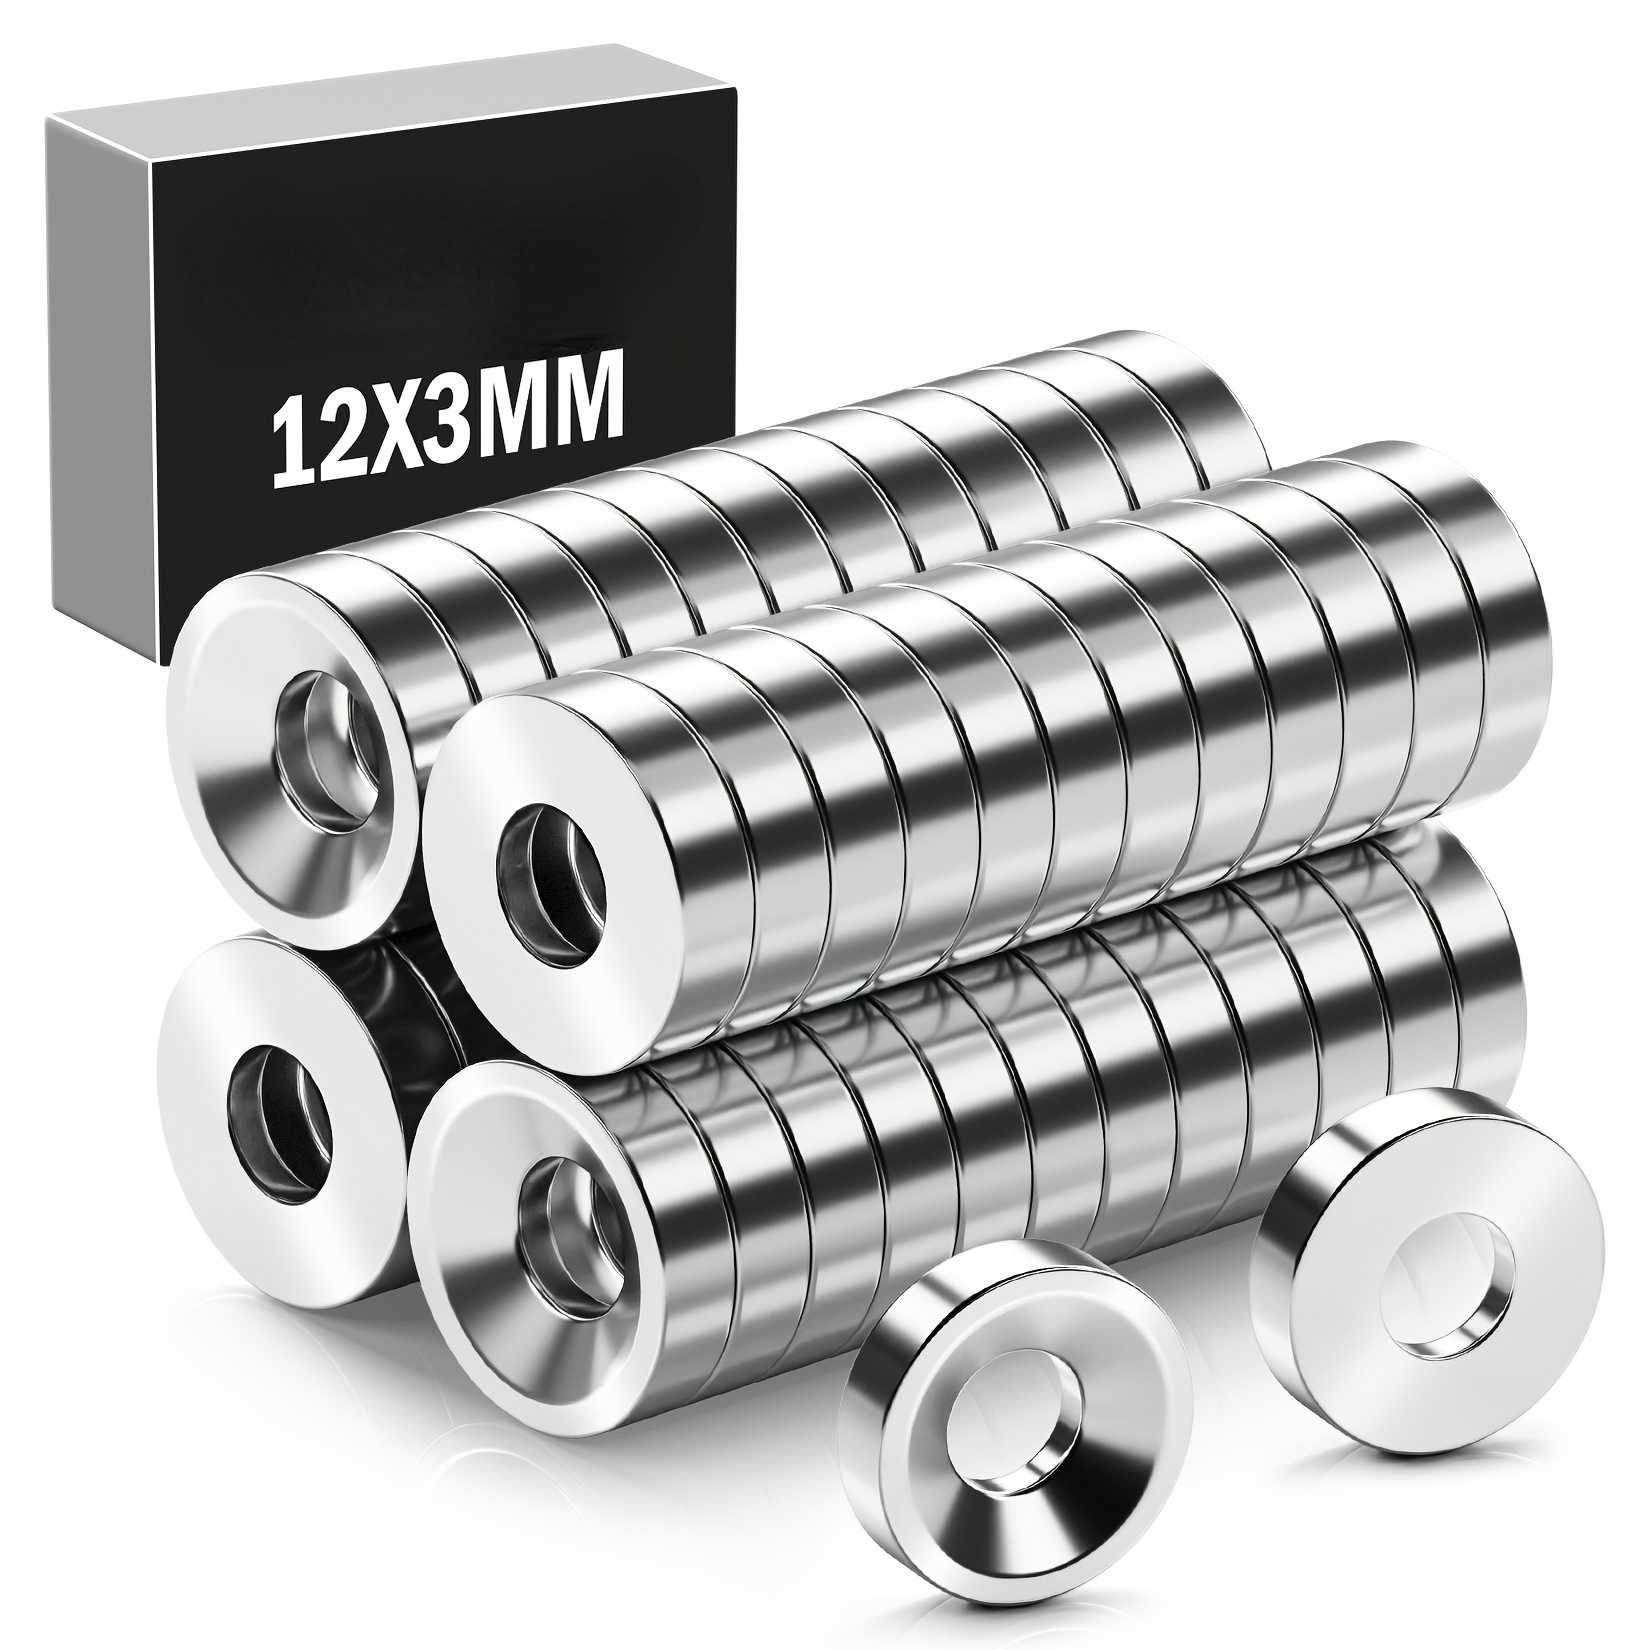 20pcs Super Strong Neodymium Magnets With Hole - Perfect for Tool